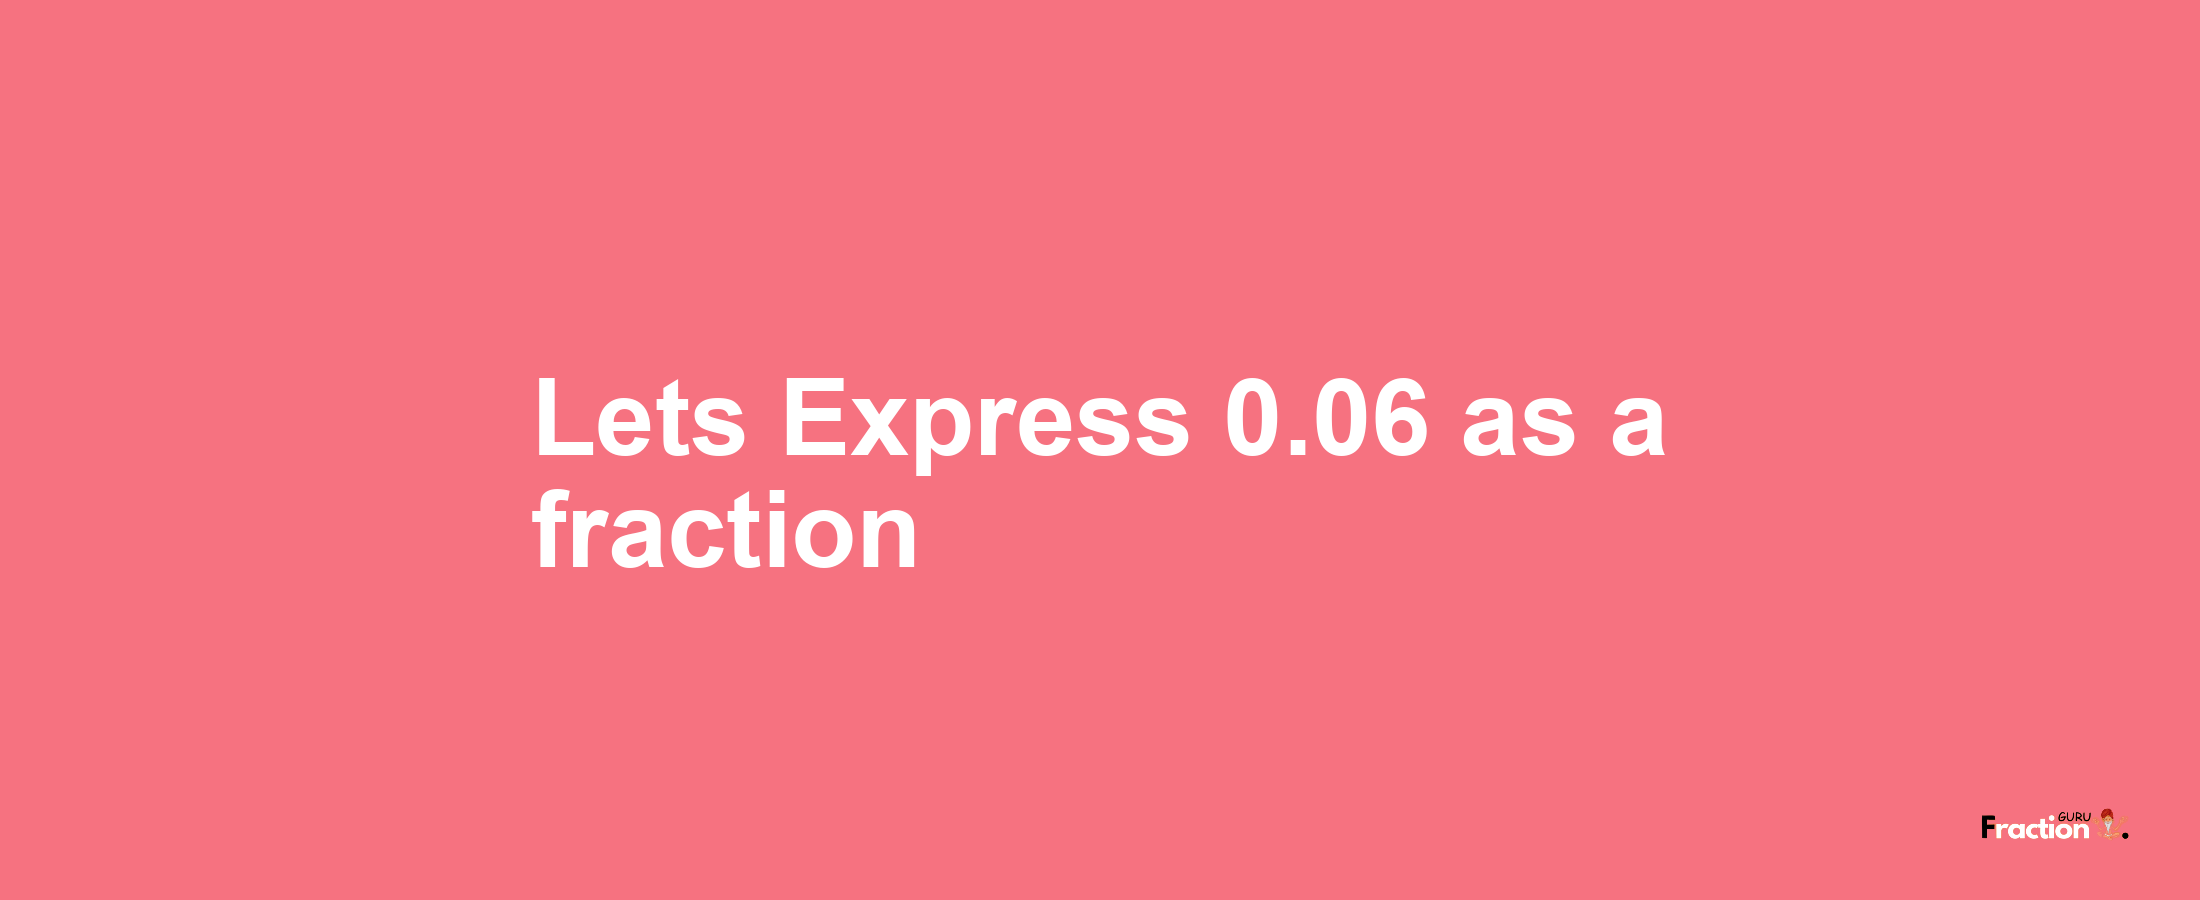 Lets Express 0.06 as afraction